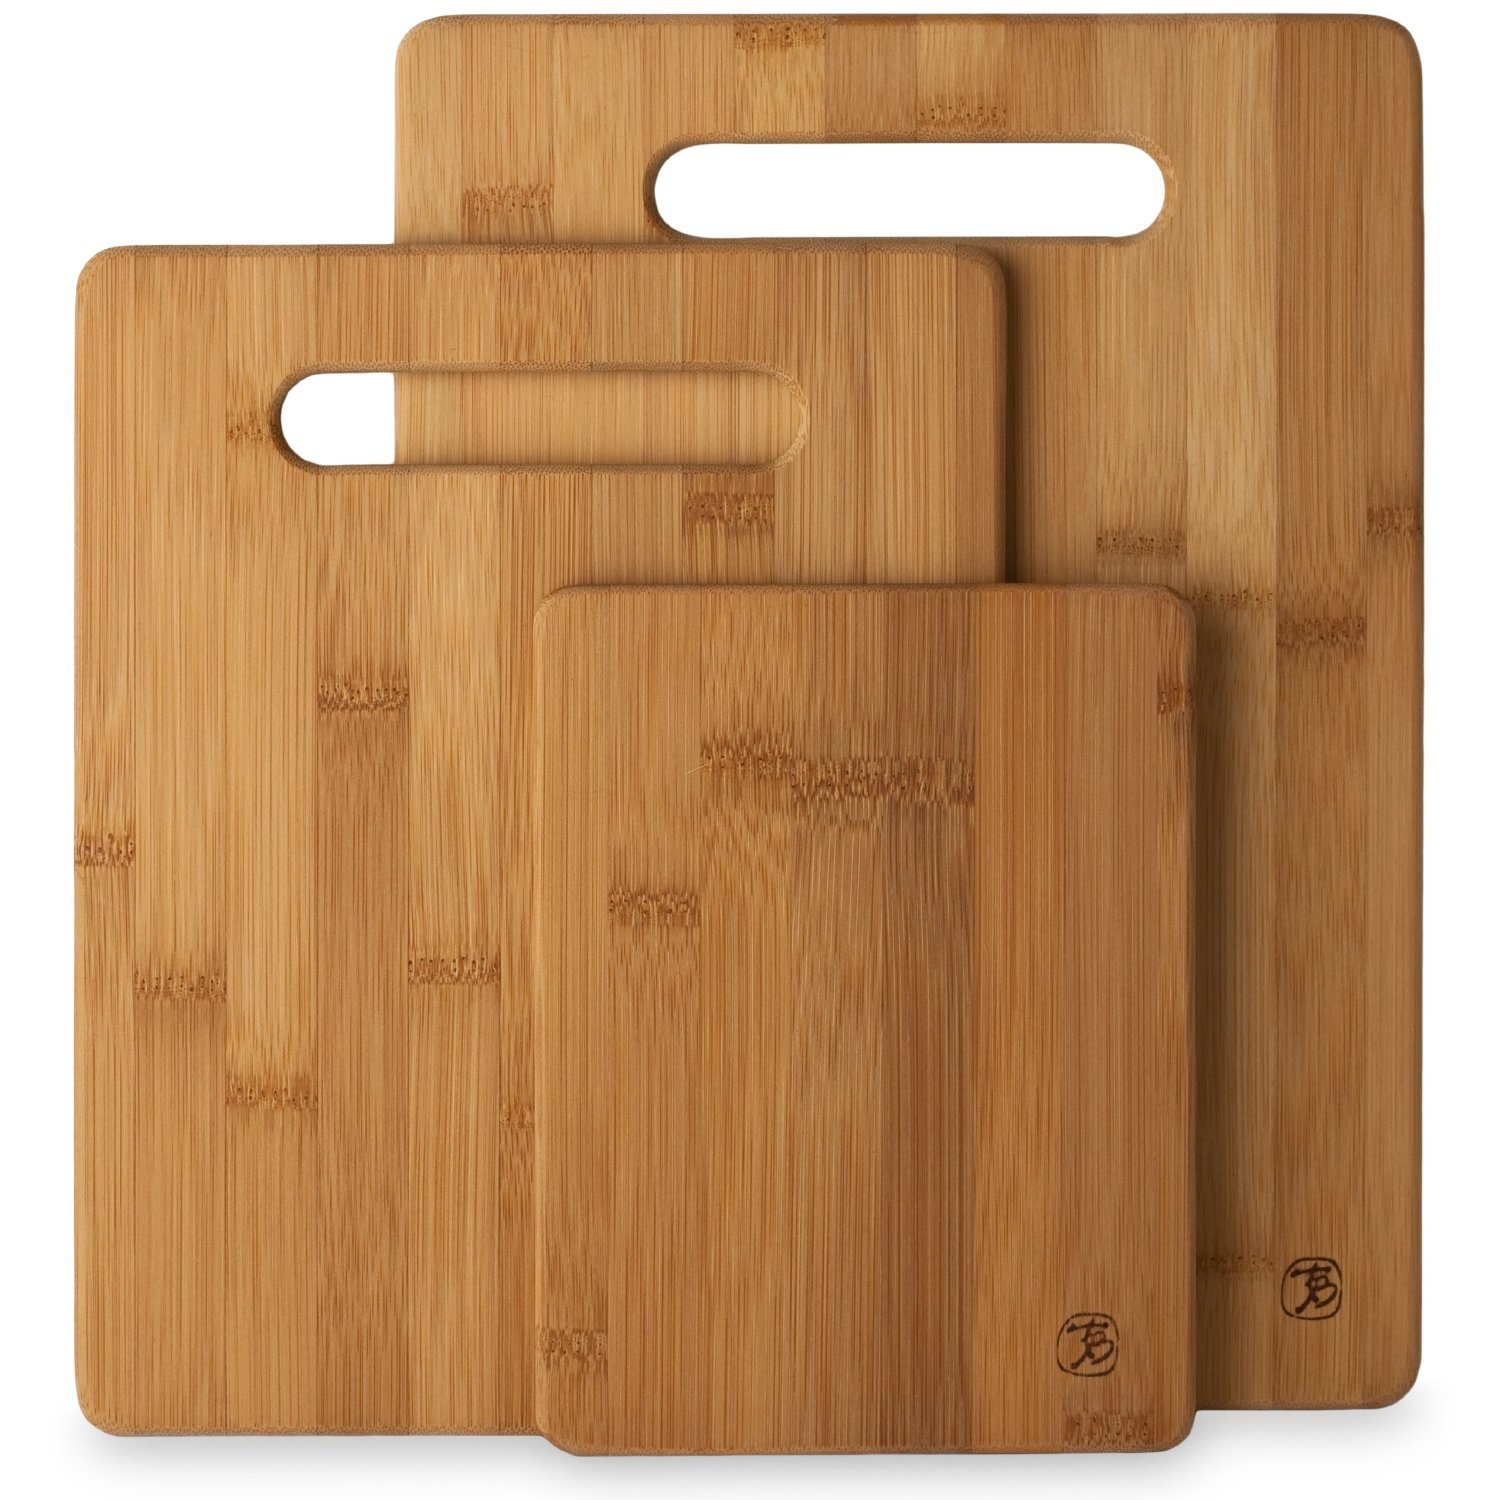 Totally Bamboo 3 Piece Bamboo Cutting Board Set – Just $12.99!